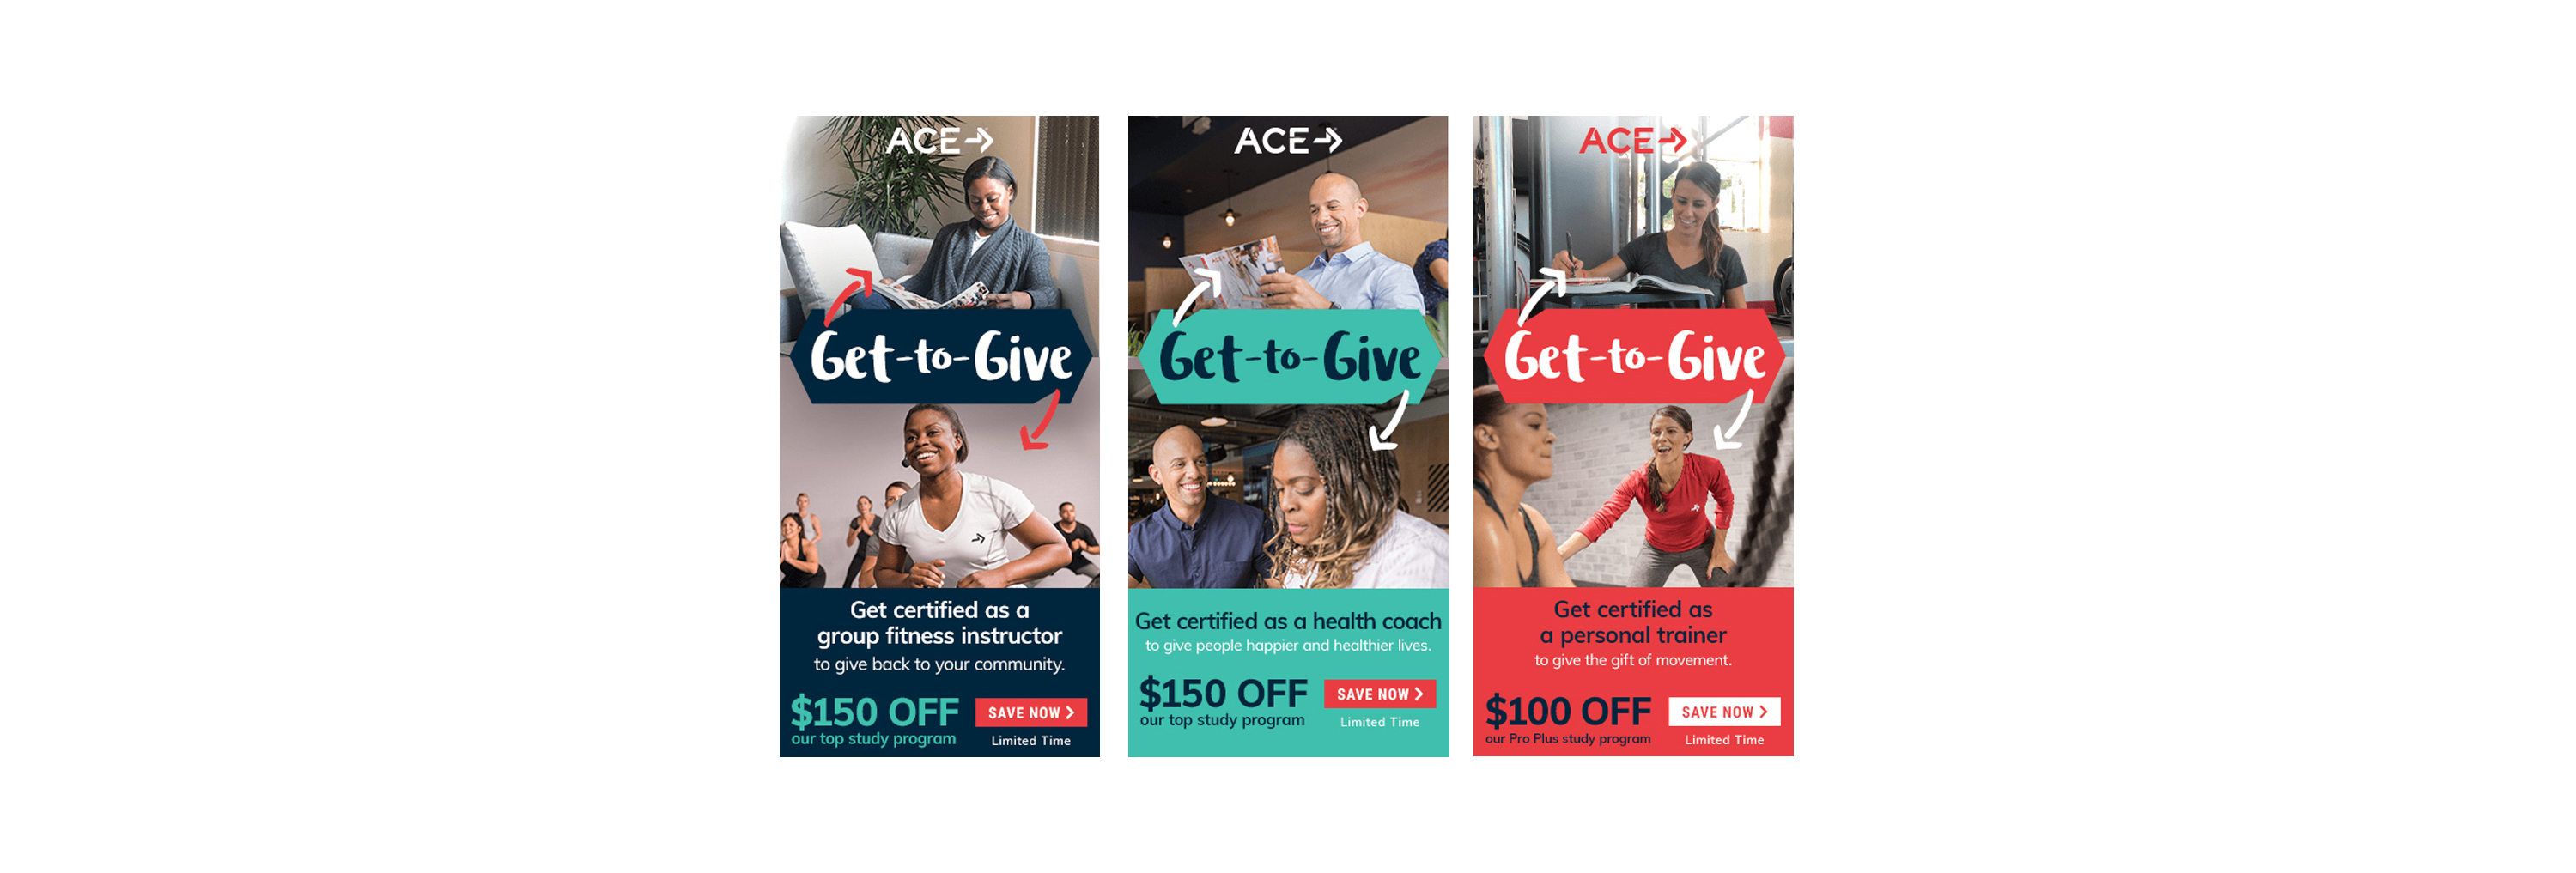 acefitness-gettogive-ppc